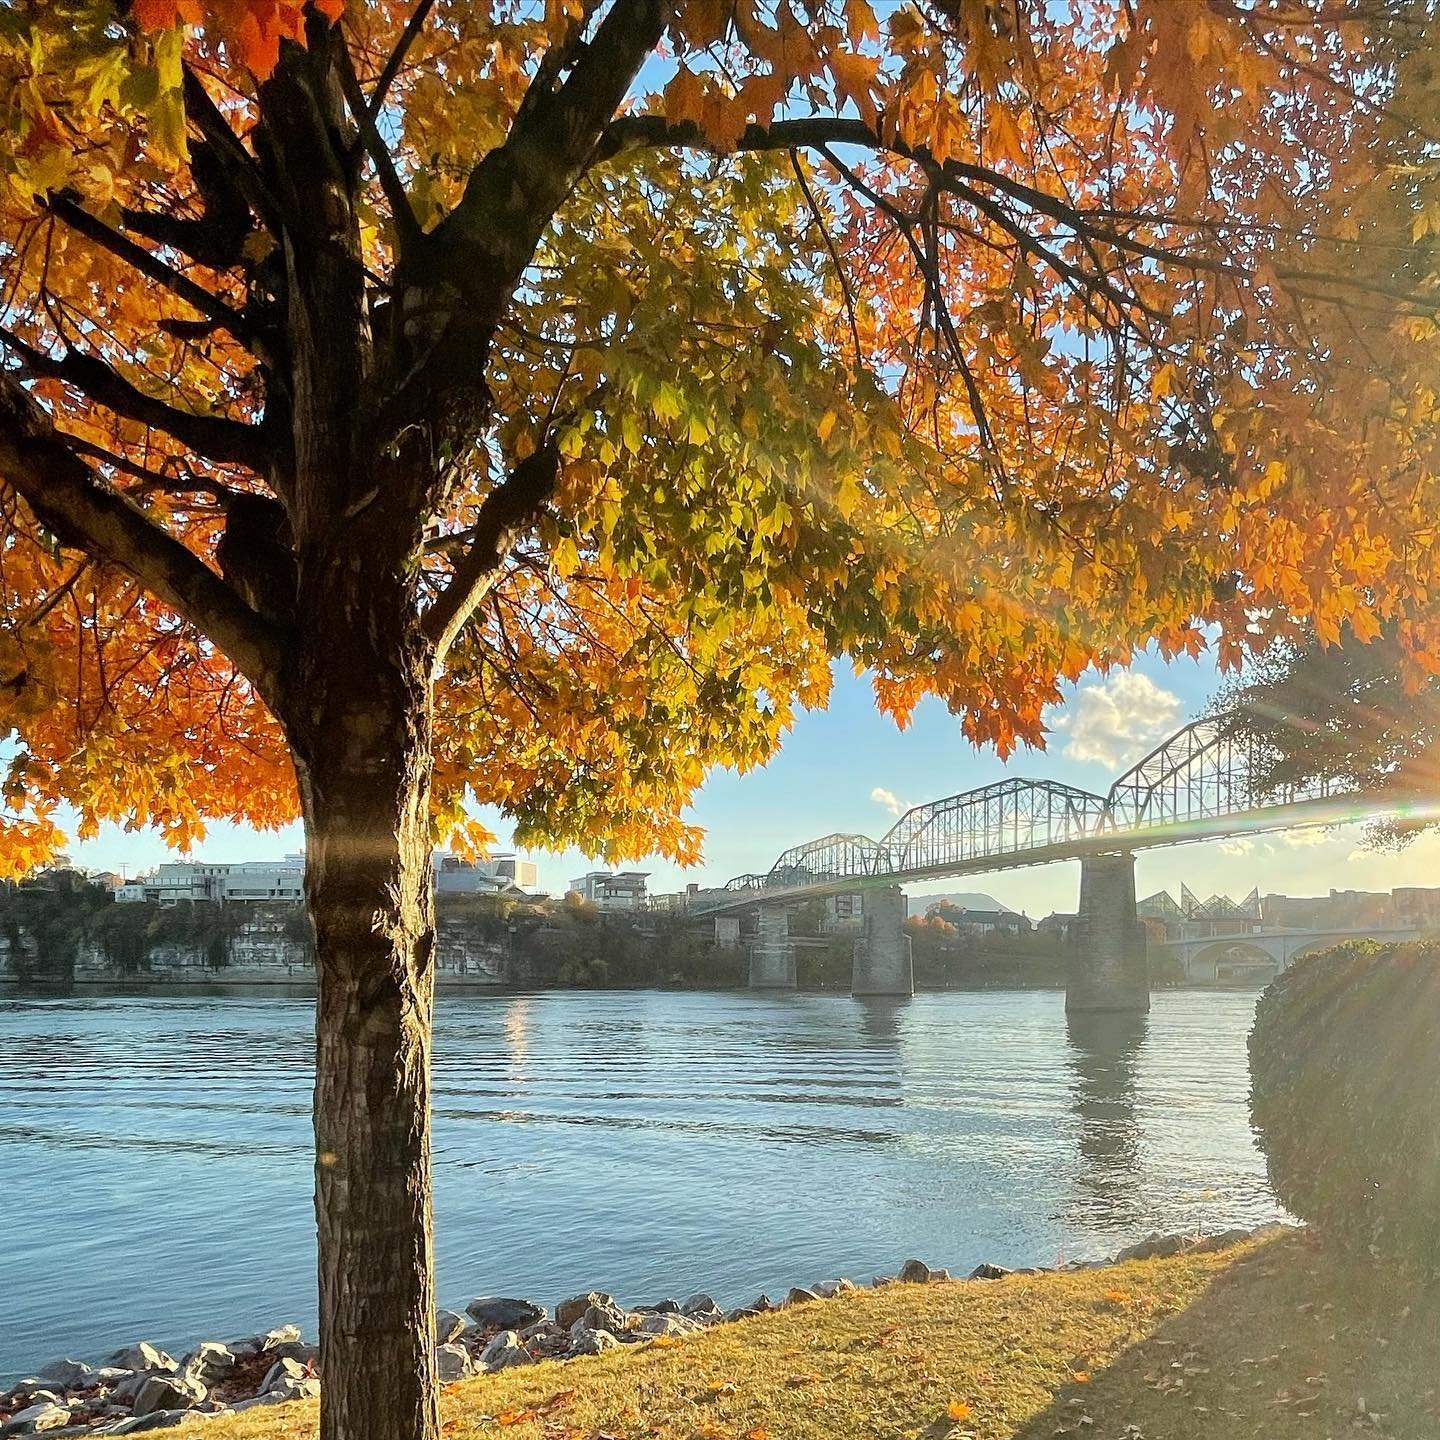 Preview image of Fall Colors in the Scenic City